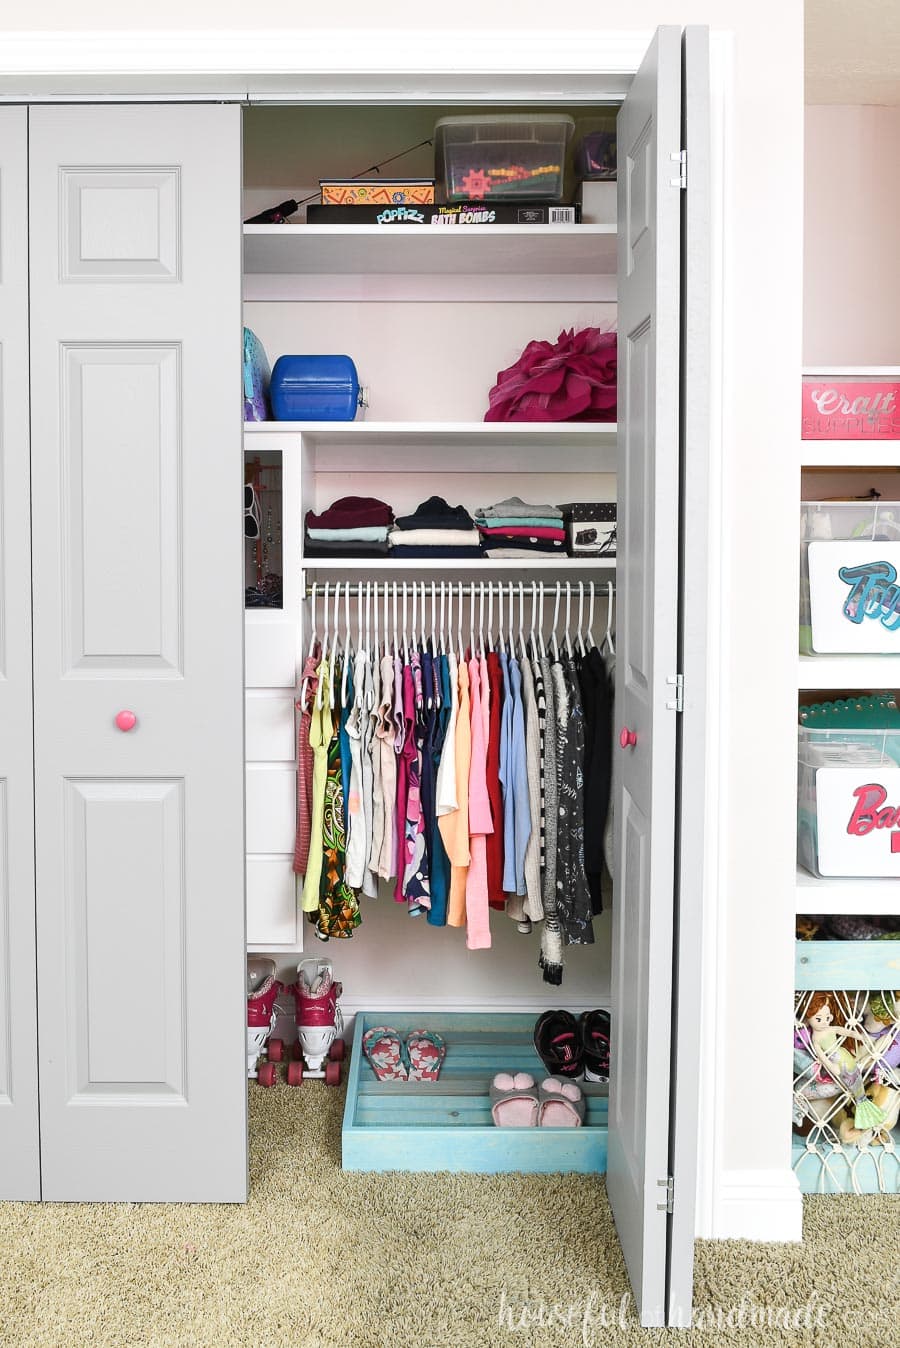 Girls organized closet with gray closet doors, one which is open showing the clothes hanging inside.